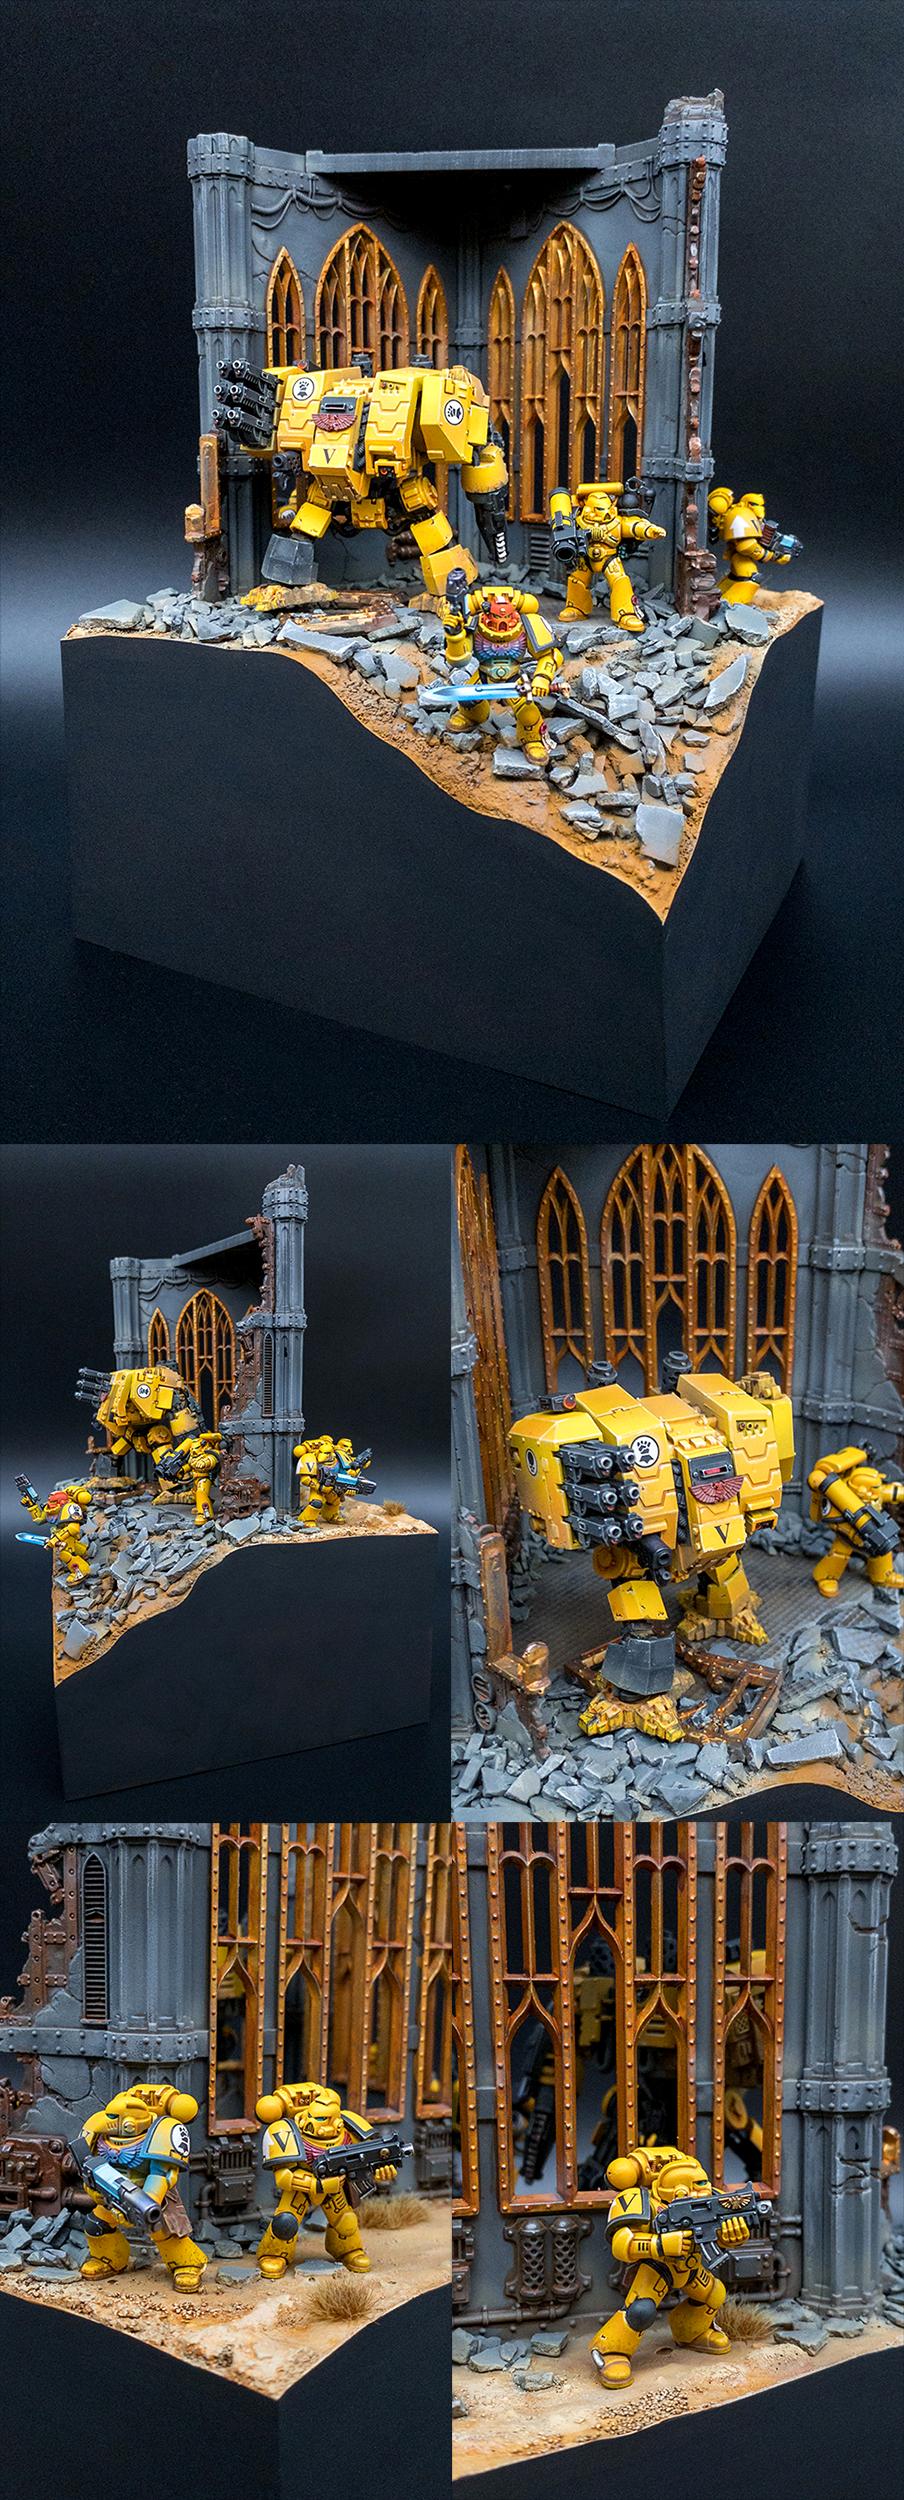 Imperial Fists, Imperium, Space Marines, Warhammer 40,000